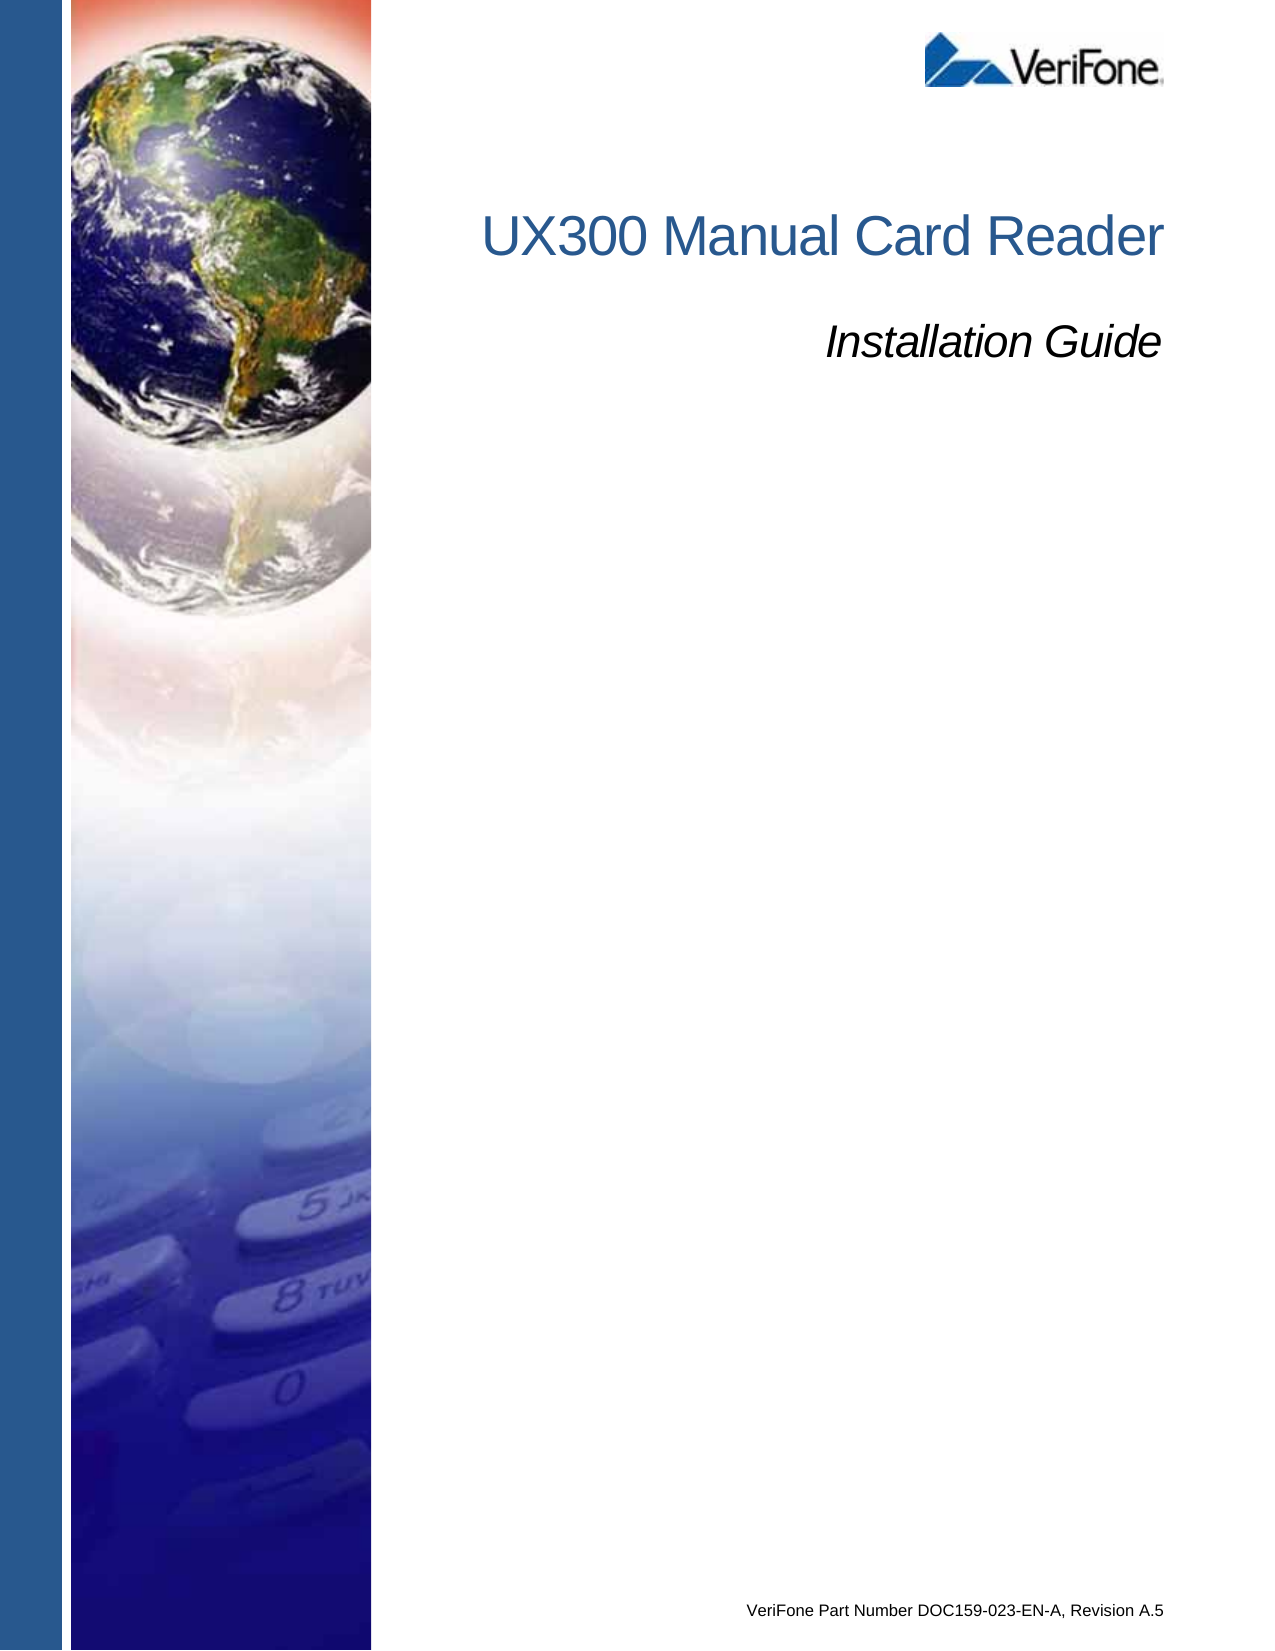 VeriFone Part Number DOC159-023-EN-A, Revision A.5UX300 Manual Card ReaderInstallation Guide